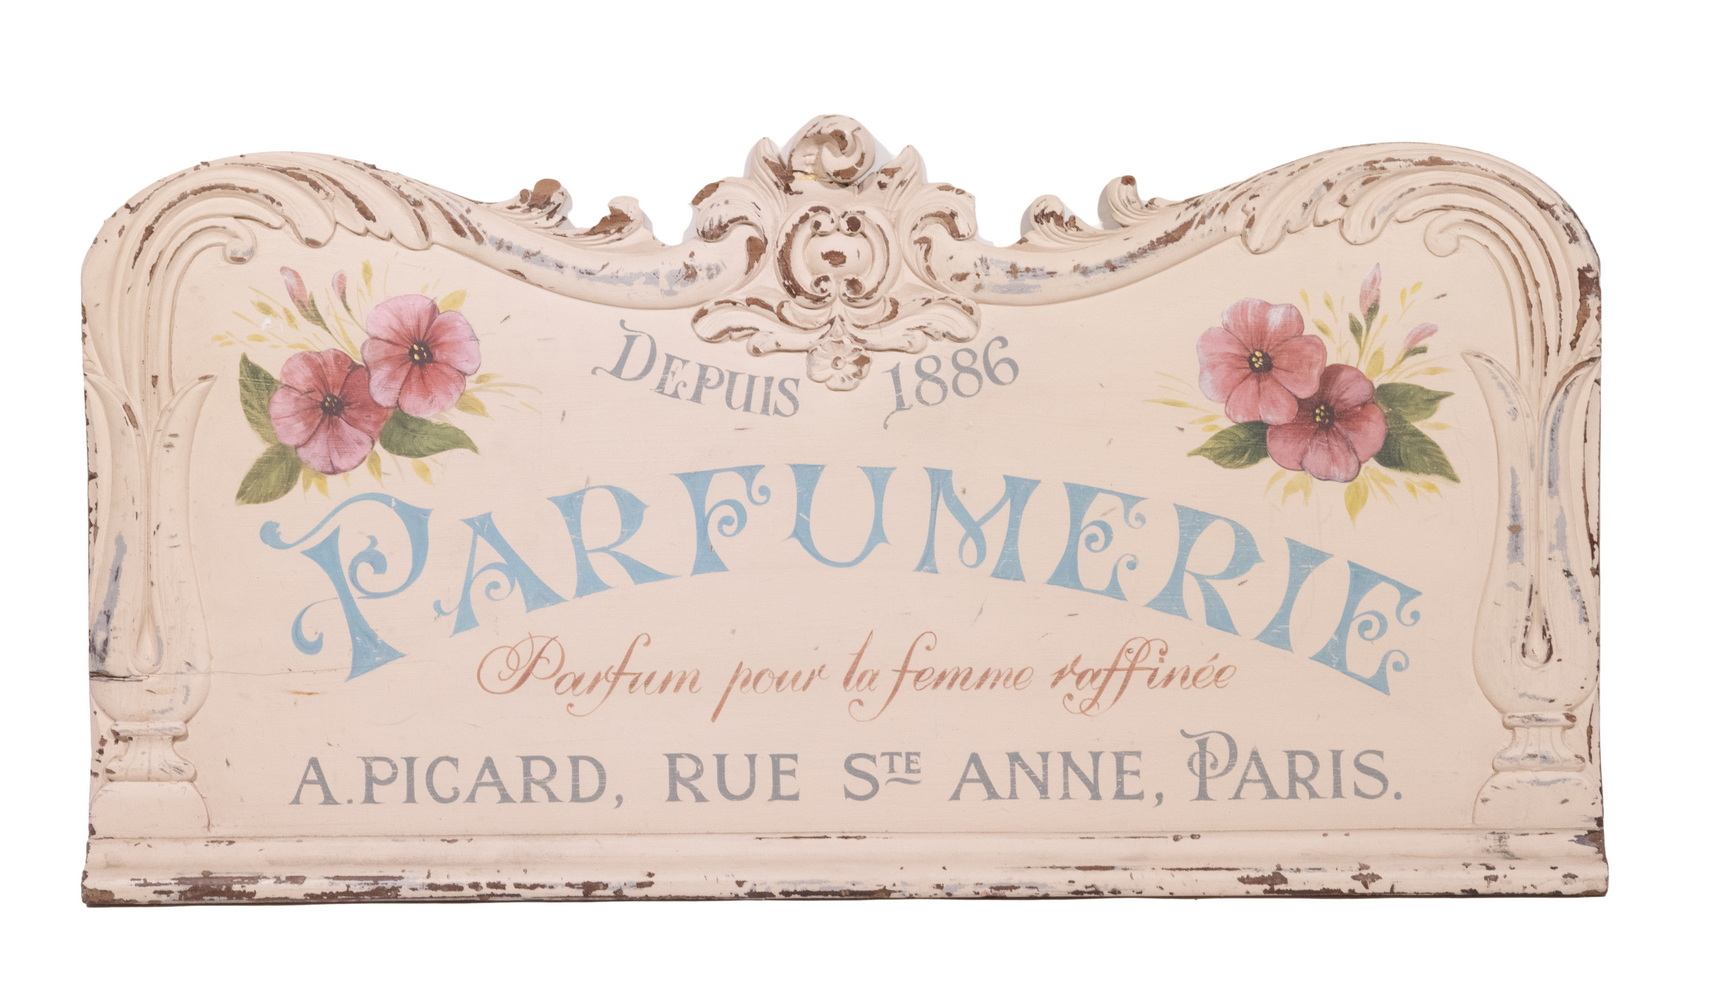 FRENCH PERFUME ADVERTISING SIGN Painted